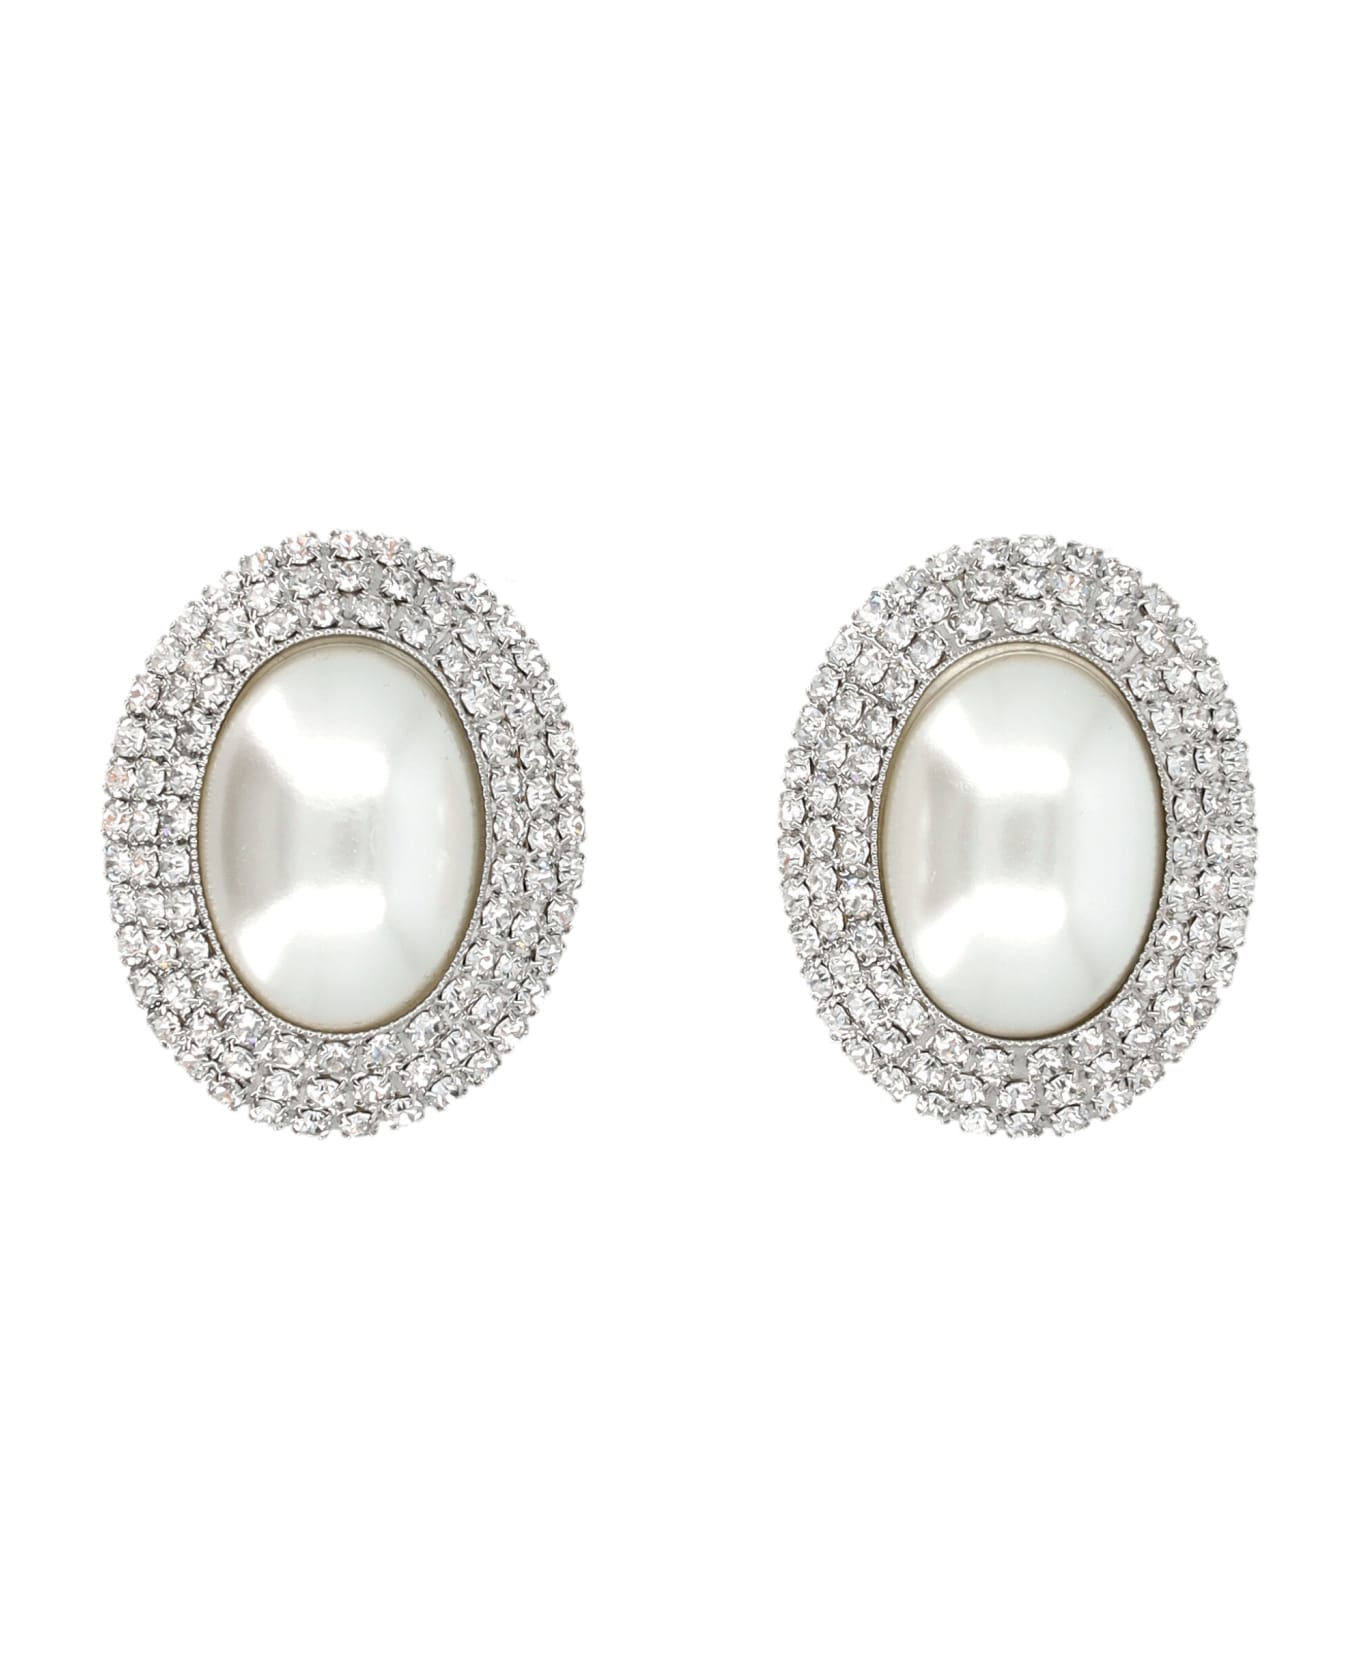 Alessandra Rich Oval With Pearl Earrings - SILVER CRYSTAL